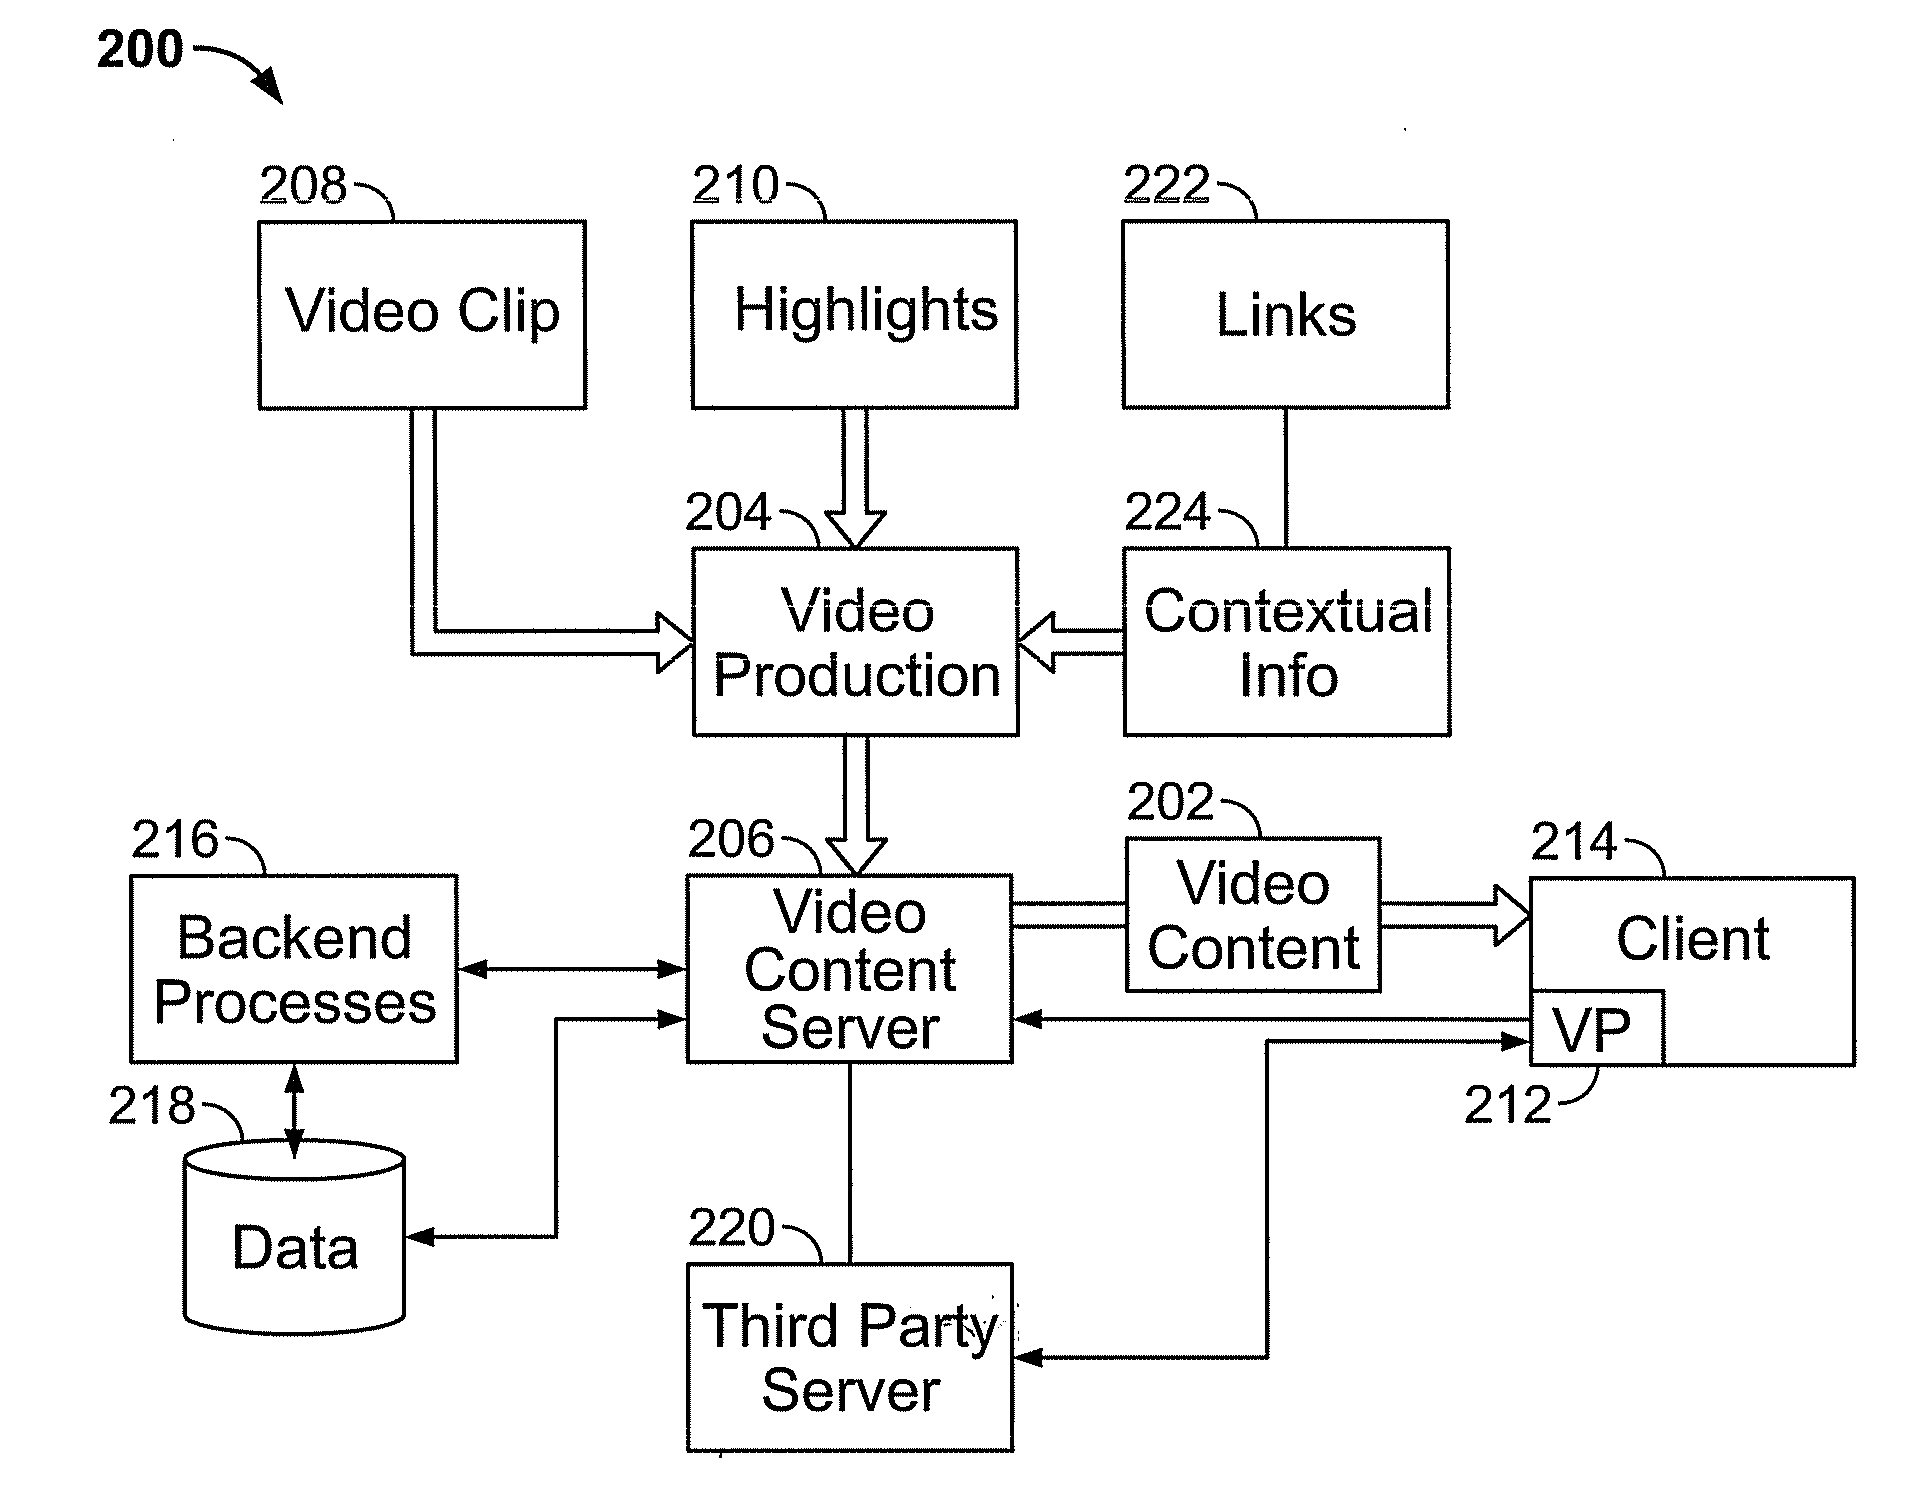 Broadband video with synchronized highlight signals